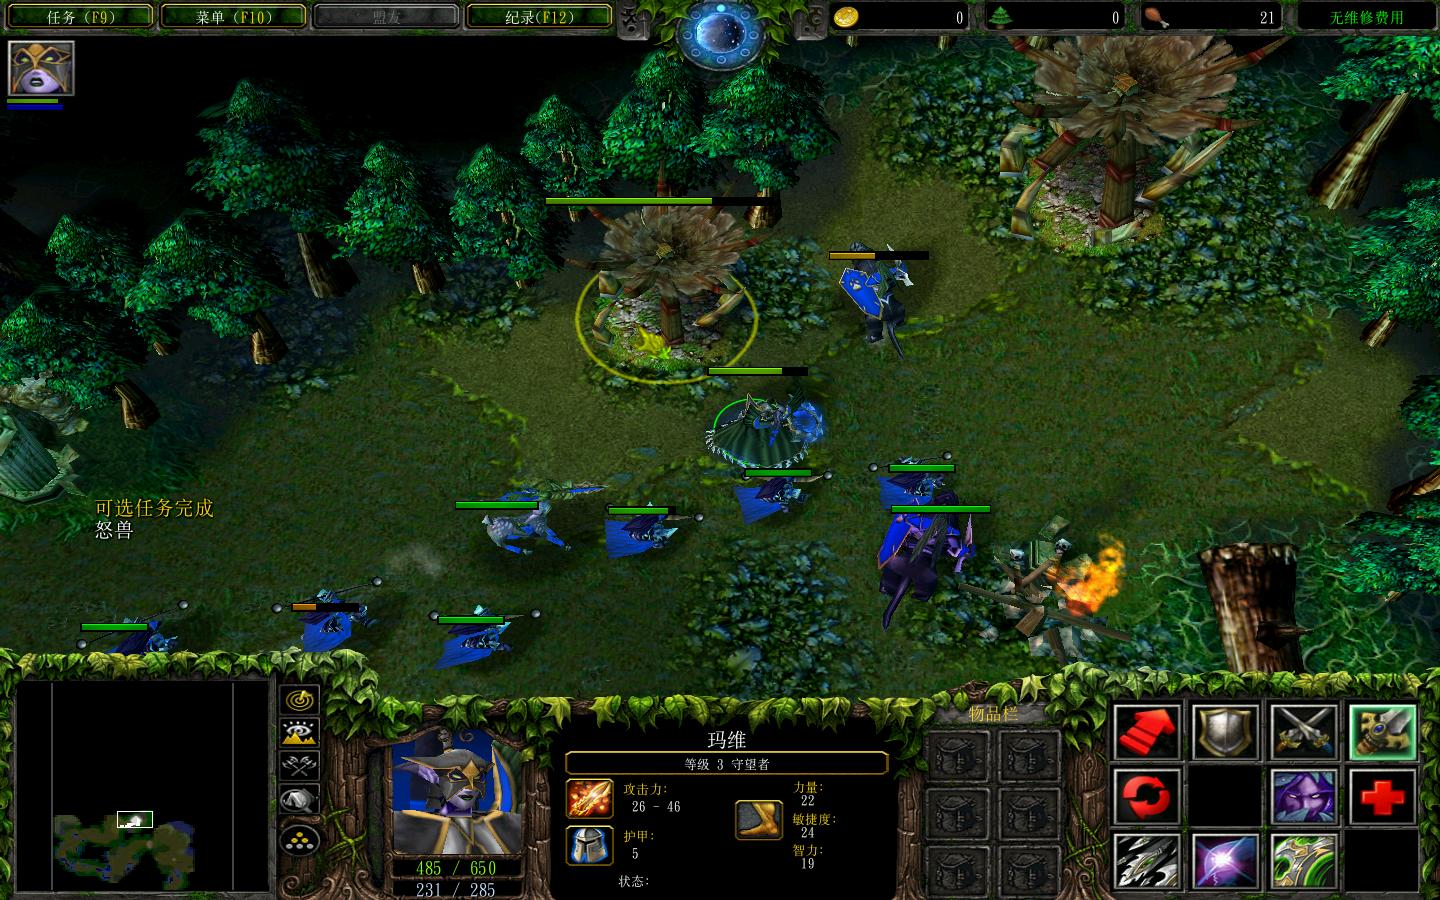 ħ3Warcraft III The Frozen Thronev1.24V1.4